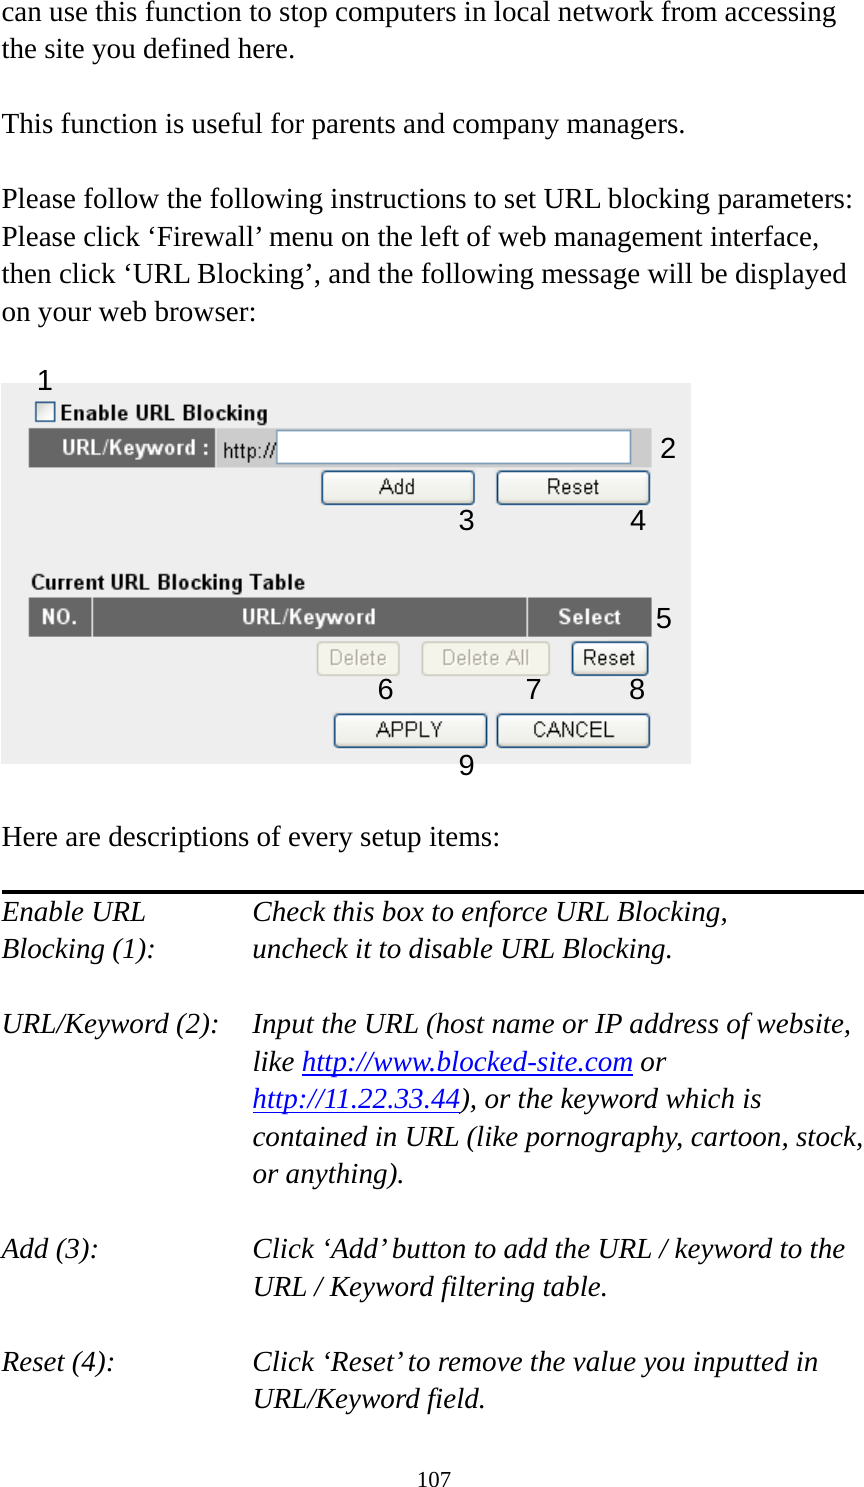 107 can use this function to stop computers in local network from accessing the site you defined here.  This function is useful for parents and company managers.  Please follow the following instructions to set URL blocking parameters: Please click ‘Firewall’ menu on the left of web management interface, then click ‘URL Blocking’, and the following message will be displayed on your web browser:    Here are descriptions of every setup items:  Enable URL      Check this box to enforce URL Blocking, Blocking (1):      uncheck it to disable URL Blocking.  URL/Keyword (2):    Input the URL (host name or IP address of website, like http://www.blocked-site.com or http://11.22.33.44), or the keyword which is contained in URL (like pornography, cartoon, stock, or anything).  Add (3):    Click ‘Add’ button to add the URL / keyword to the URL / Keyword filtering table.  Reset (4):    Click ‘Reset’ to remove the value you inputted in URL/Keyword field. 2 3 4 5 6 7 8 9 1 